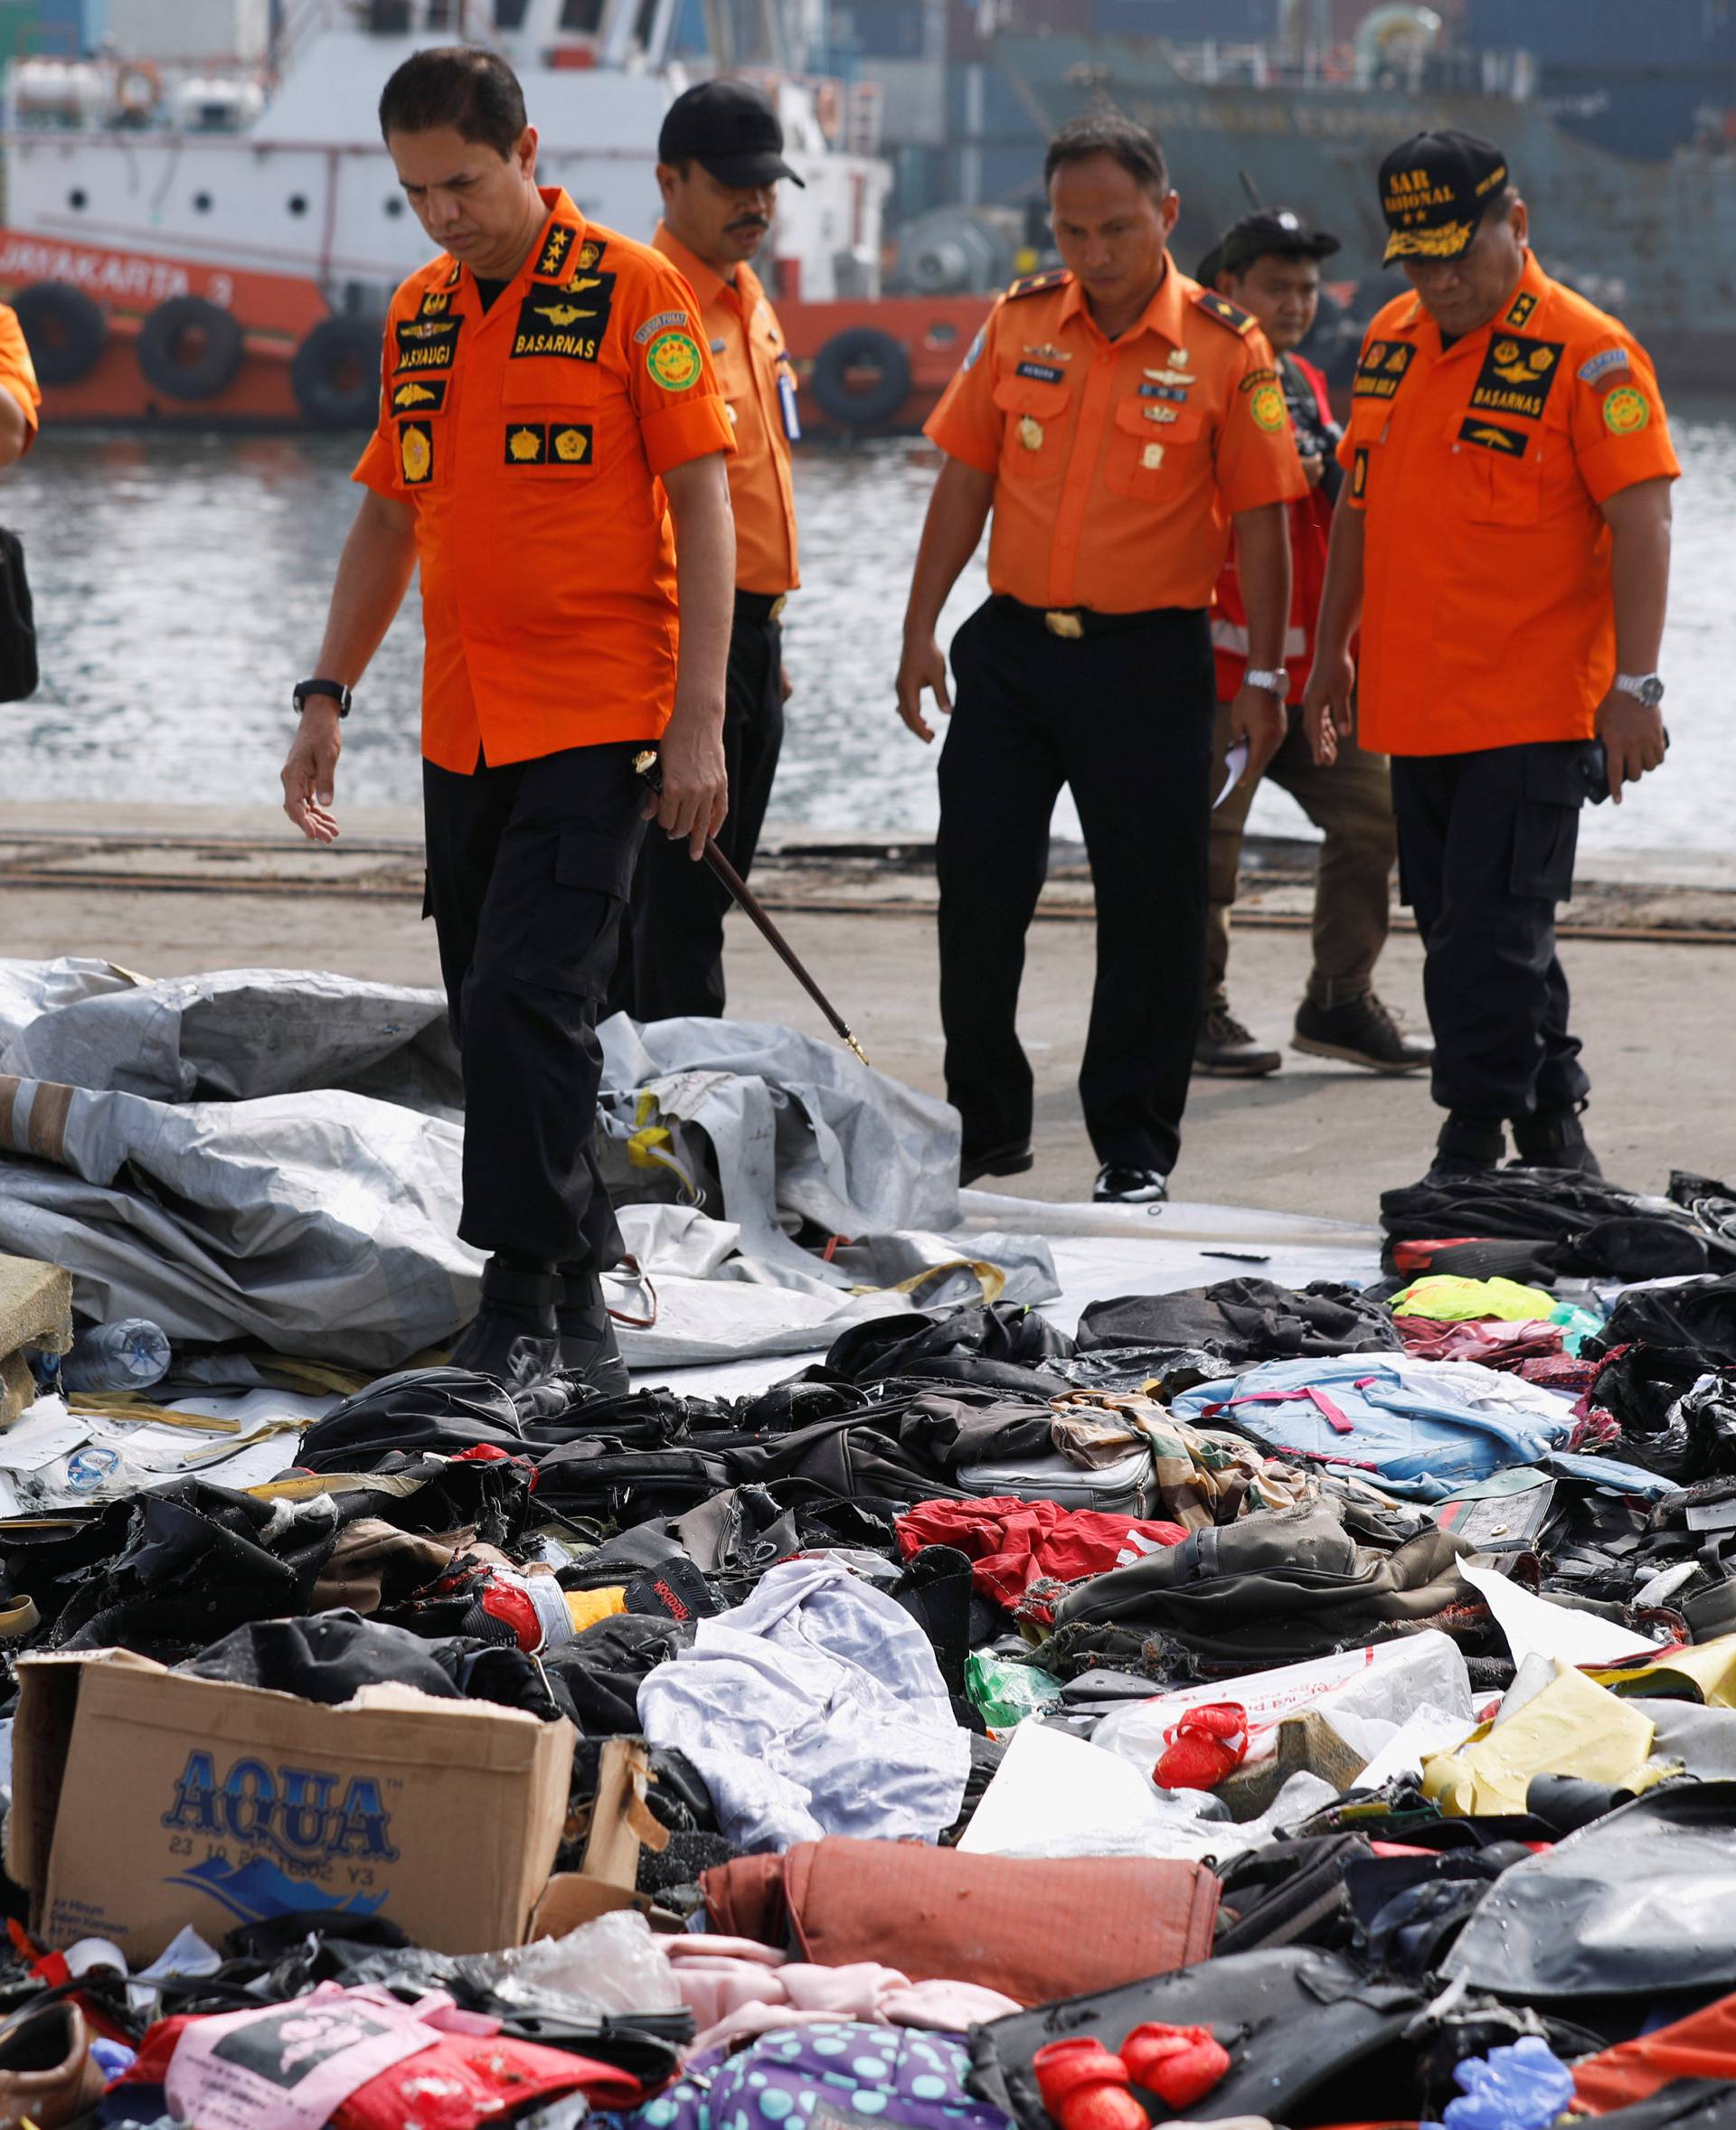 Chief of Indonesia's Lion Air flight JT610 search and rescue operations Muhammad Syaugi looks through recovered belongings believed to be from the crashed flight at Tanjung Priok port in Jakarta